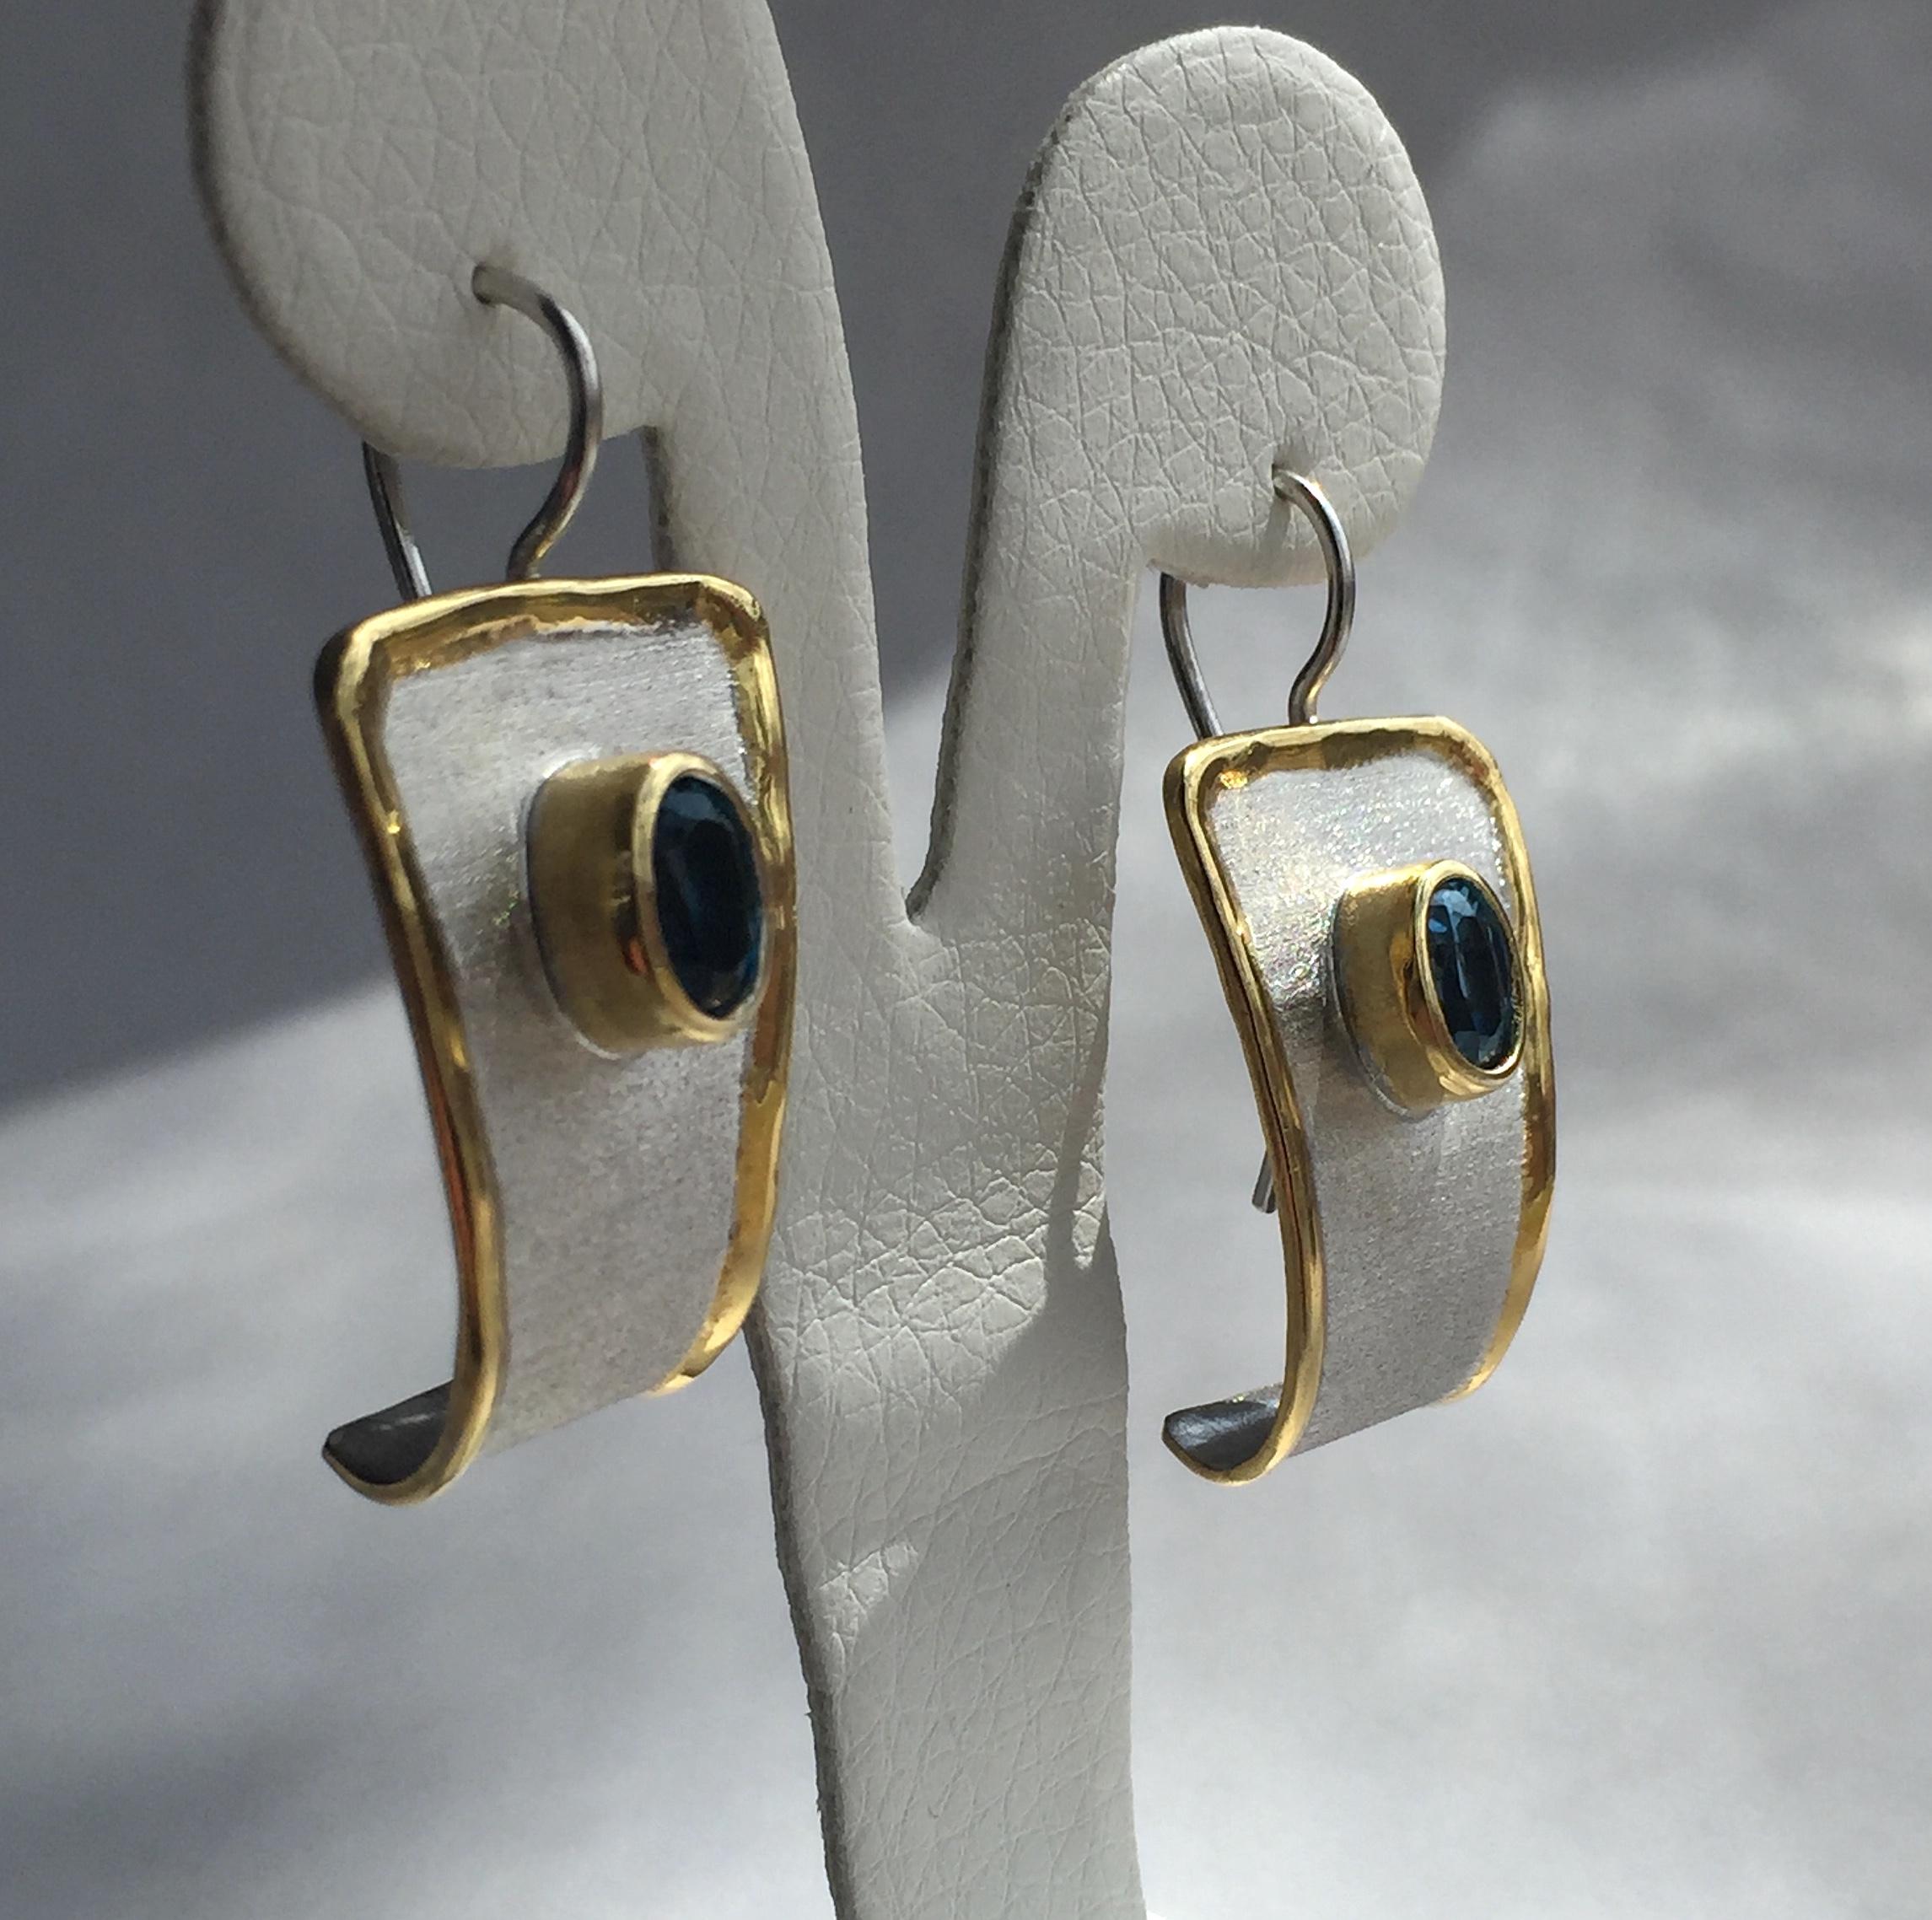 Yianni Creations London Blue Topaz Fine Silver Gold 24 Karat Two-Tone Earrings In New Condition For Sale In Astoria, NY